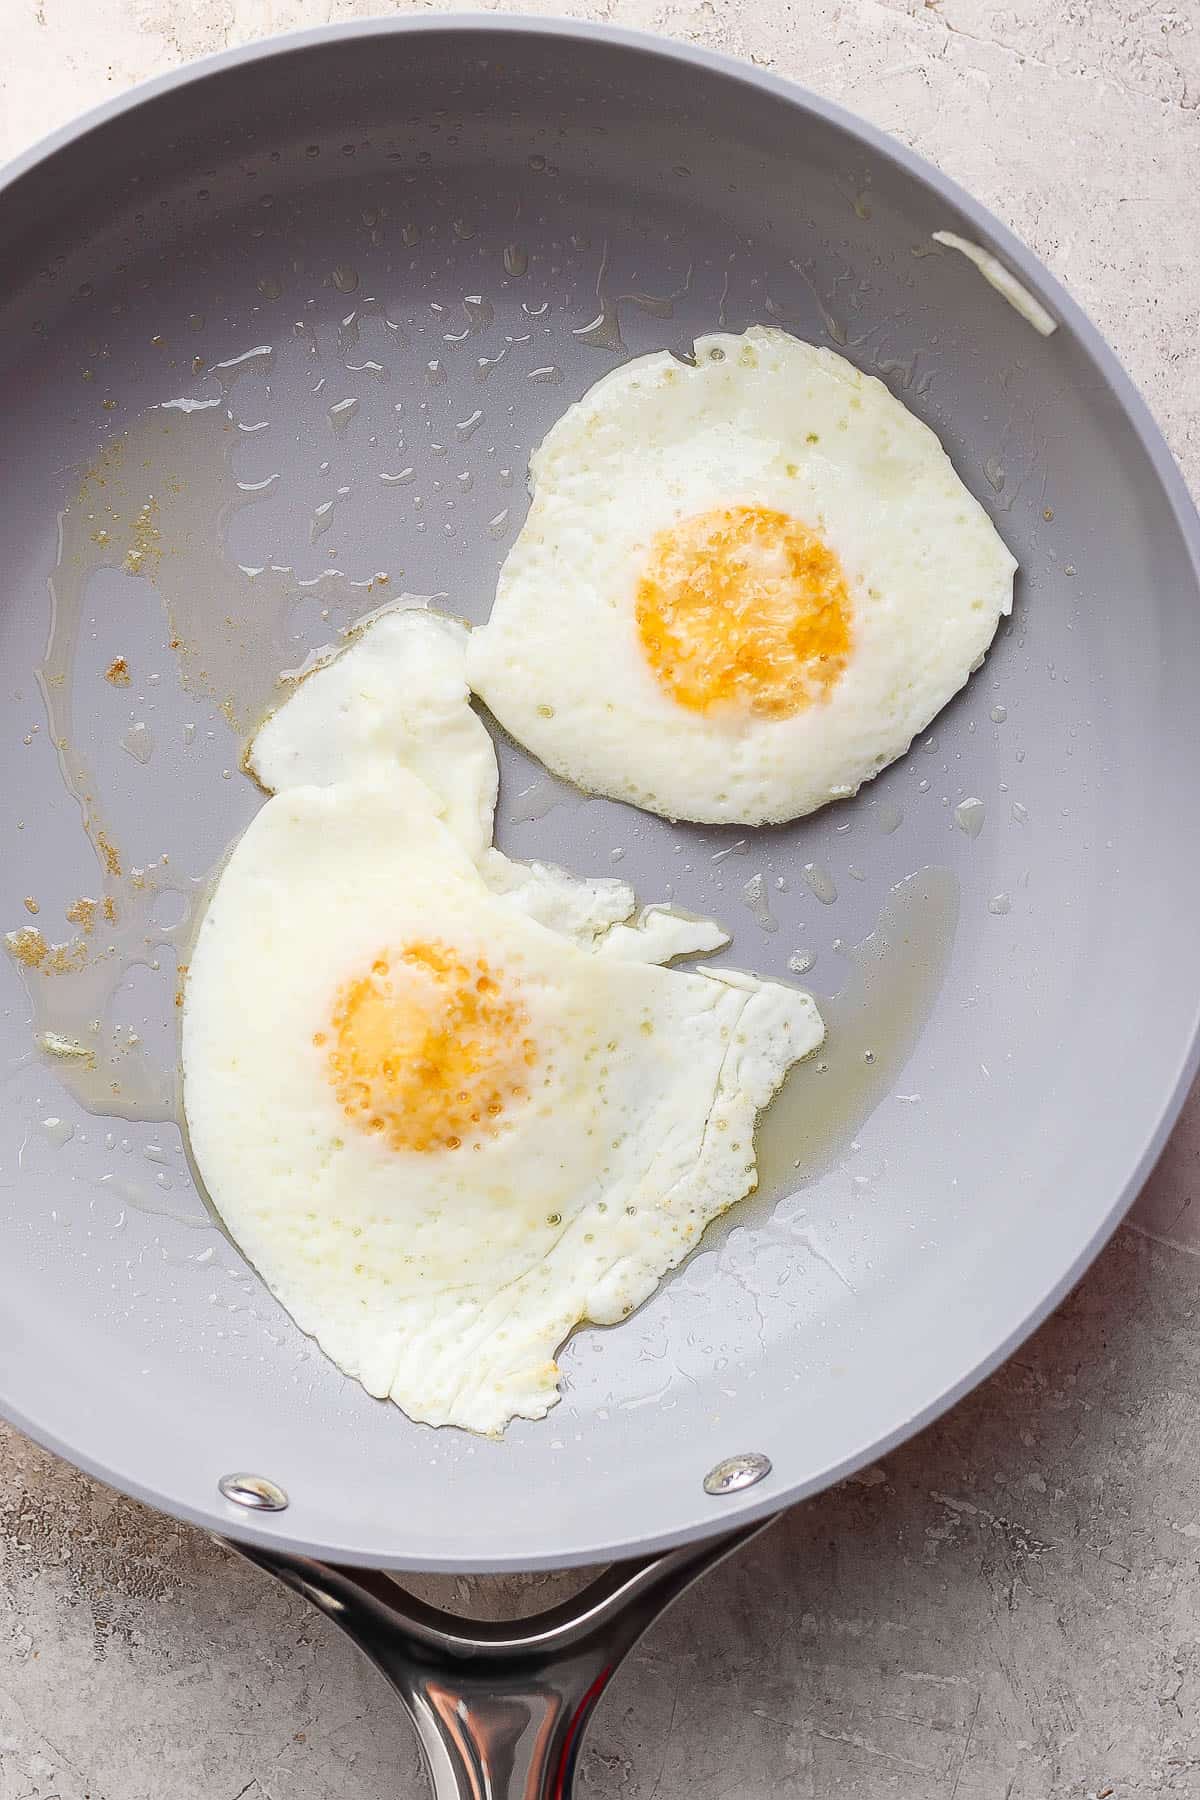 Two eggs flipped in the skillet.